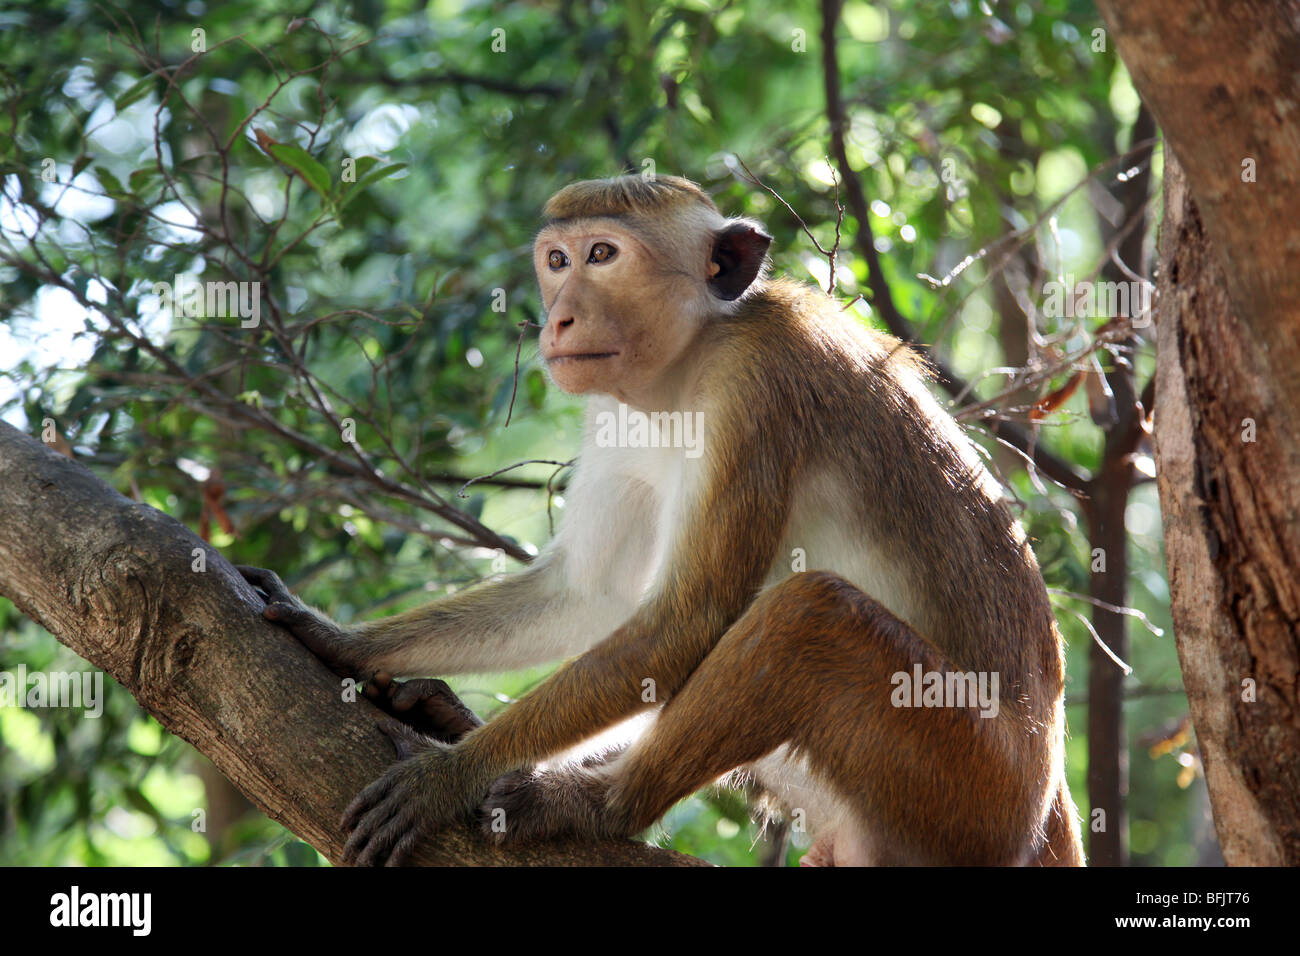 A Monkey perched in a tree in the grounds of Sigiriya. Sri Lanka. Stock Photo